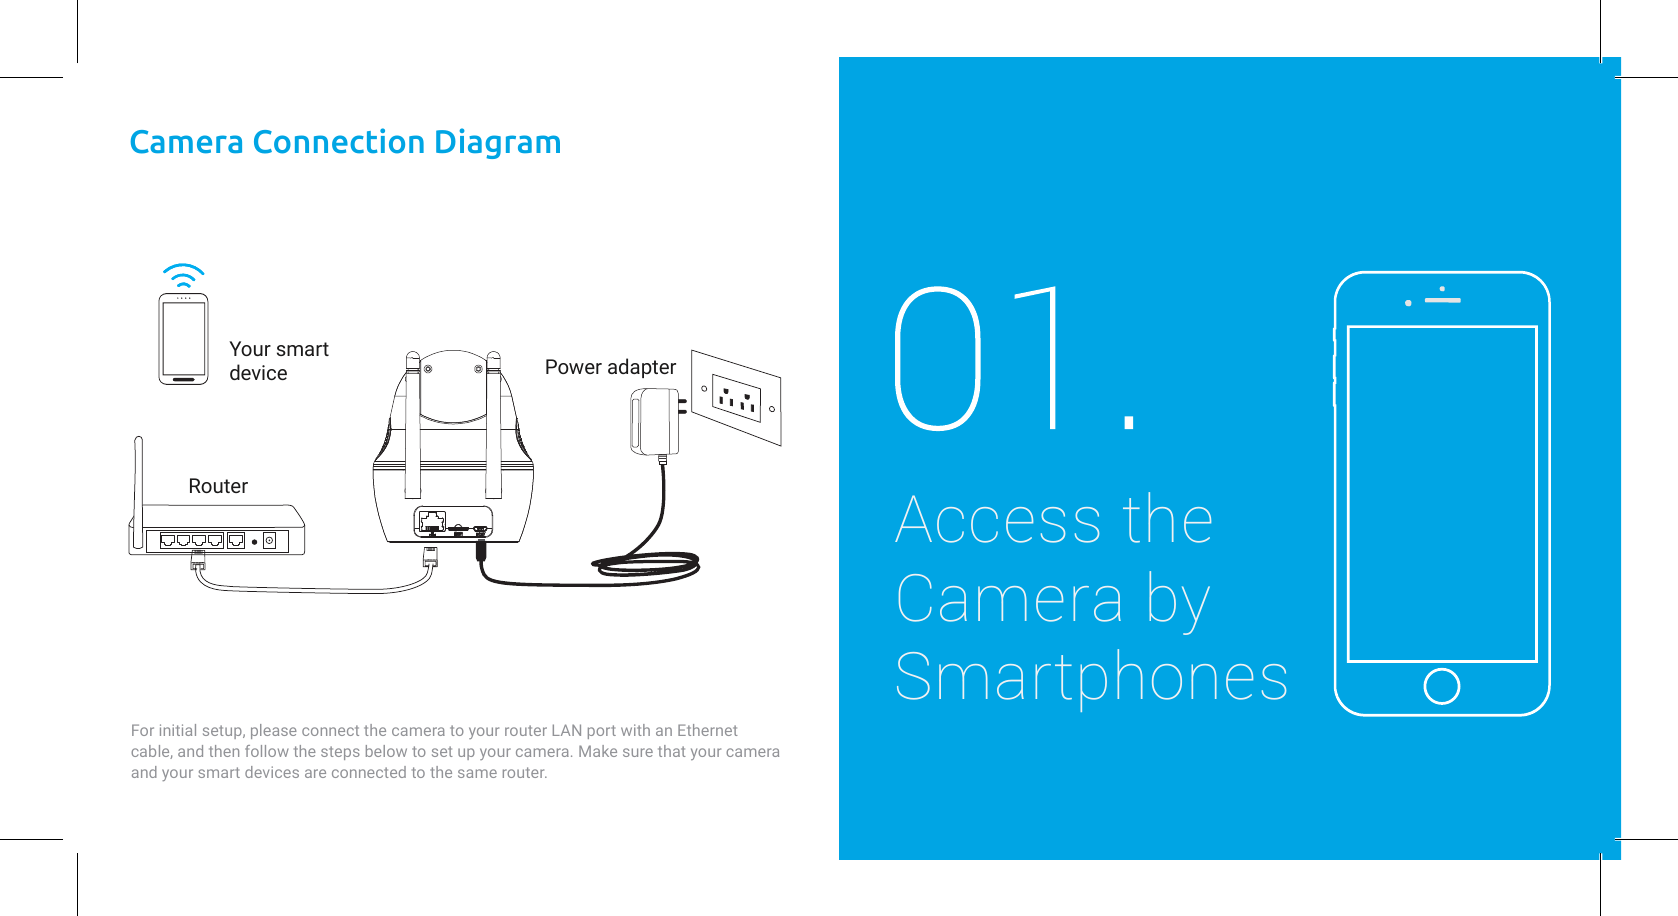 Camera Connection DiagramPower adapterRouterYour smartdeviceFor initial setup, please connect the camera to your router LAN port with an Ethernet cable, and then follow the steps below to set up your camera. Make sure that your camera and your smart devices are connected to the same router.Access the Camera bySmartphones